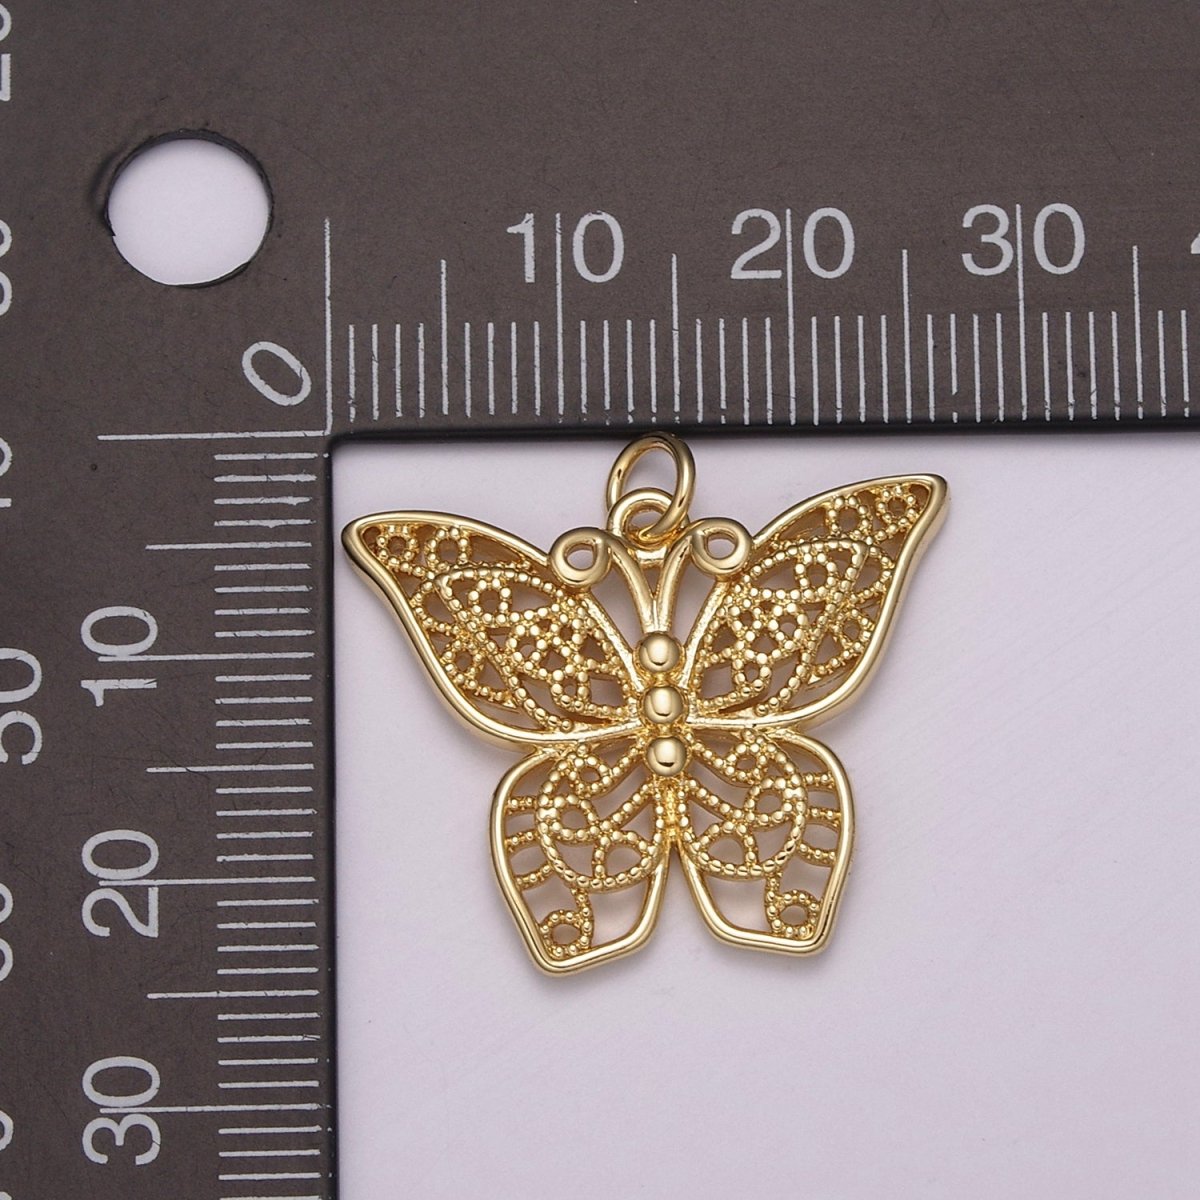 Micro Pave Gold Monarch Charm, Bracelet, Necklace, Earring Pendant Butterfly Charm N-162 N-163 - DLUXCA